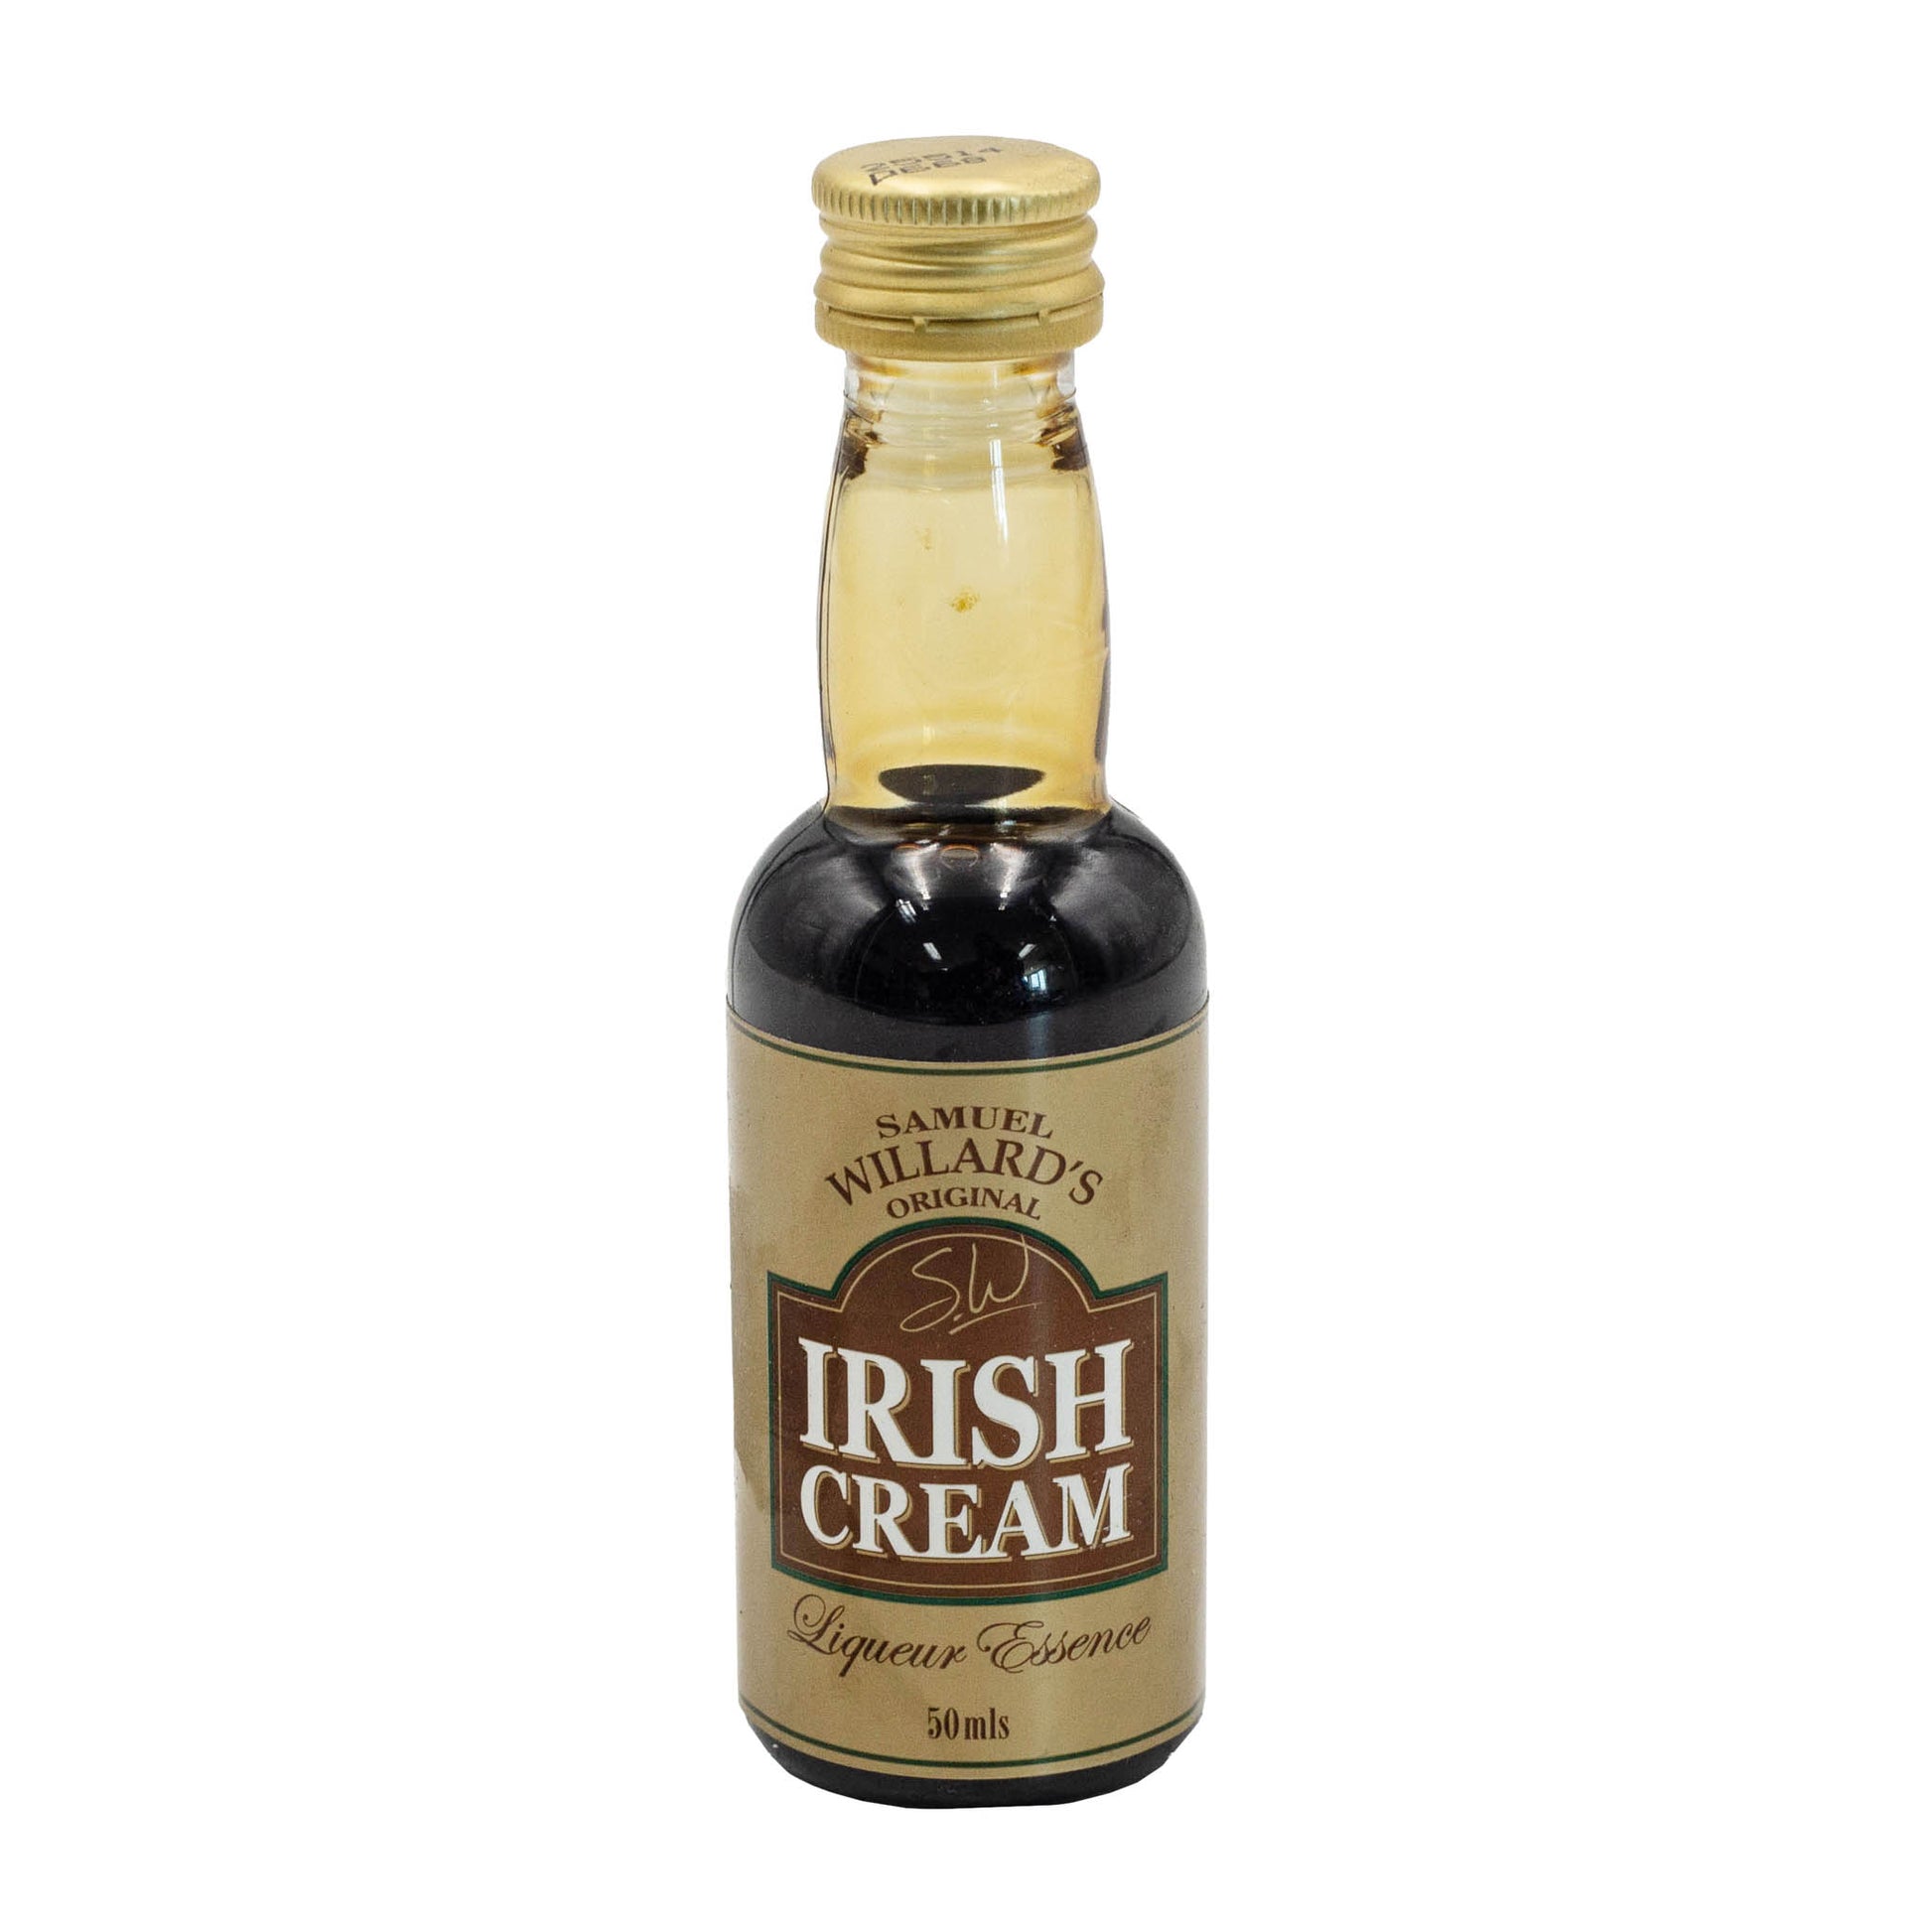 Samuel Willards Irish Cream essence makes a Baileys style drink. Will make 1125ml of finished product from each 50ml bottle